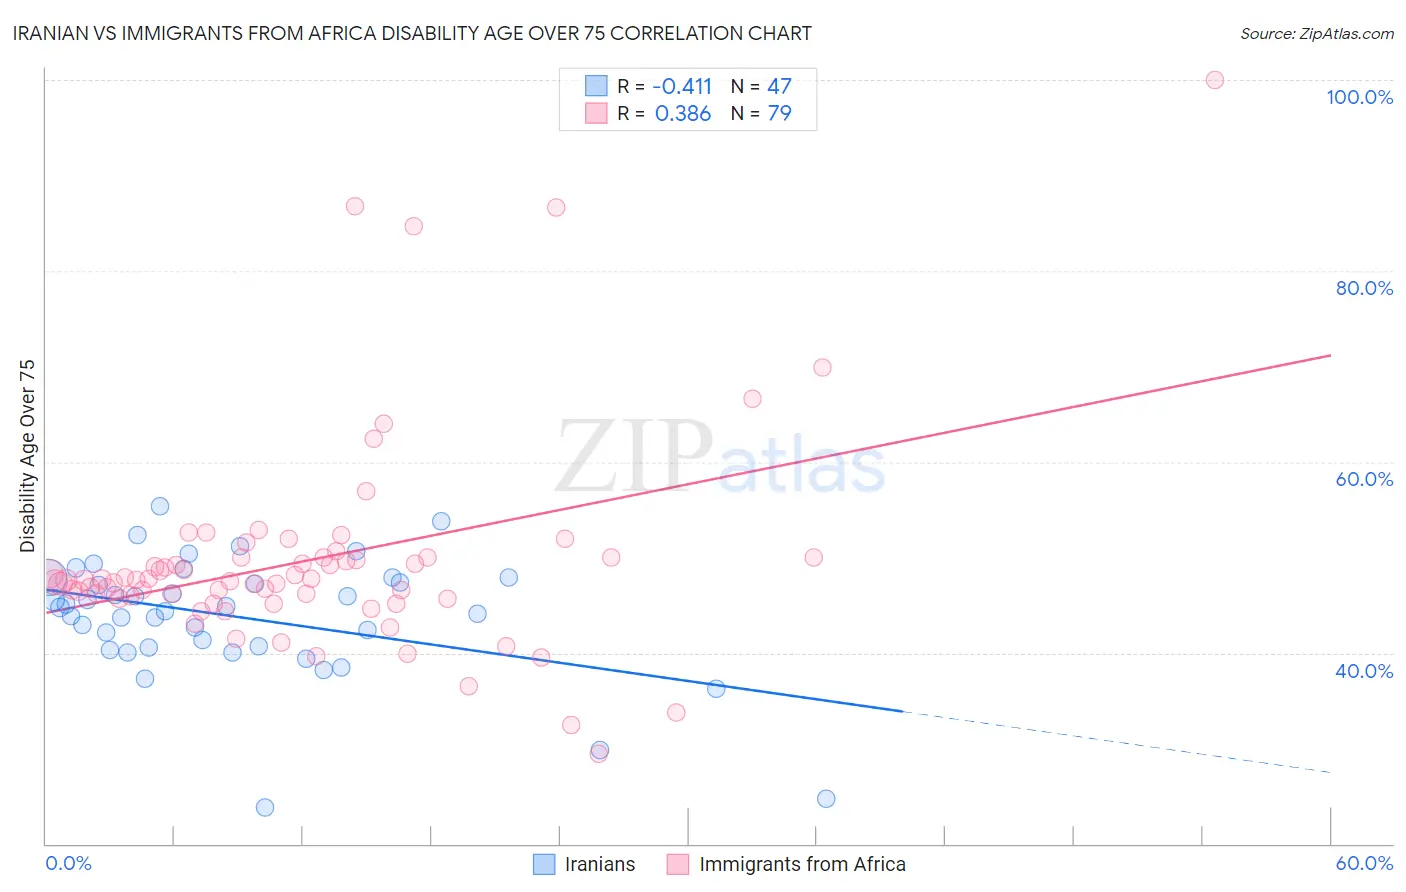 Iranian vs Immigrants from Africa Disability Age Over 75